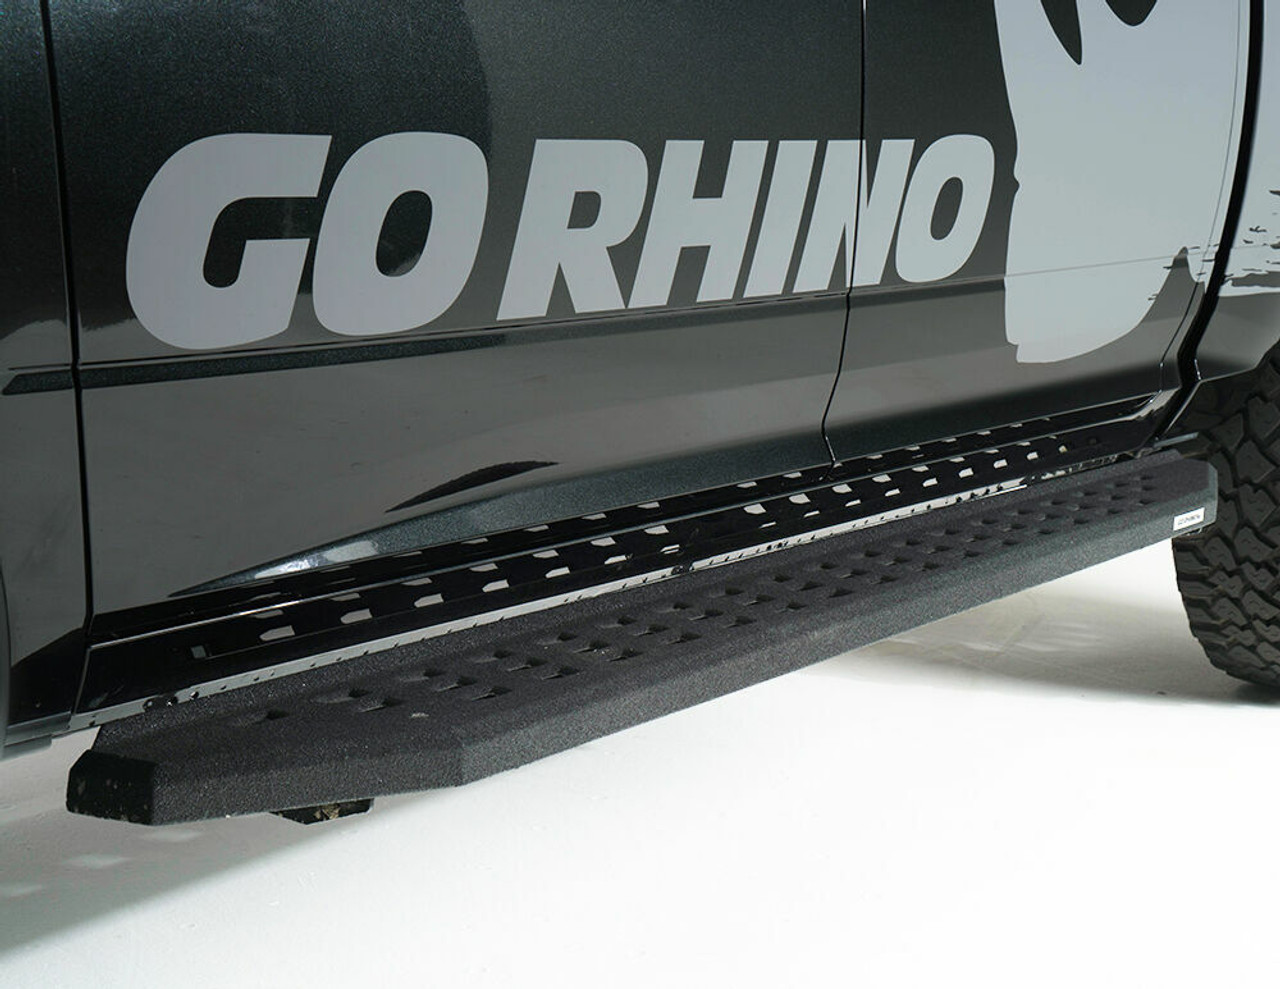 Go Rhino 6940588020T Chevy, Silverado 1500 LD (Classic), 2014-2019, RB20 Running boards - Complete Kit: 2 pair RB20 Drop Steps, Galvanized Steel, Bedliner coating, 69400080T RB20 + 6940475 RB Brackets + (2) 69420000T Drop Step, Classic Body Only